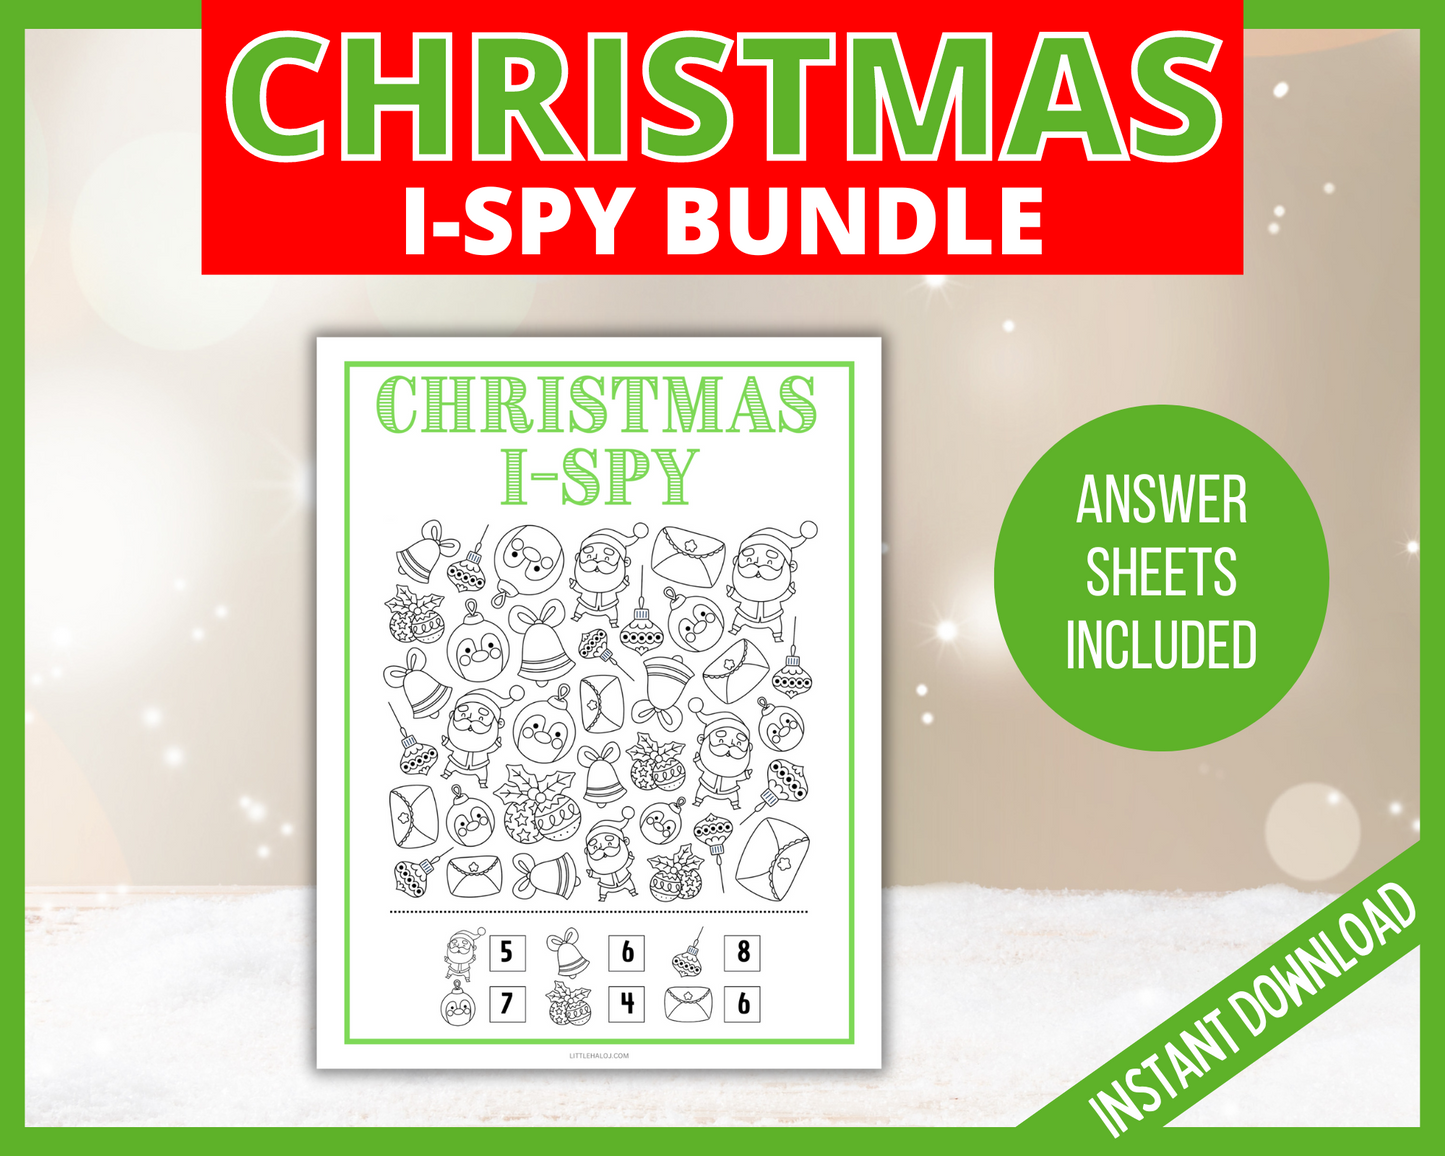 Christmas ISpy games with answers